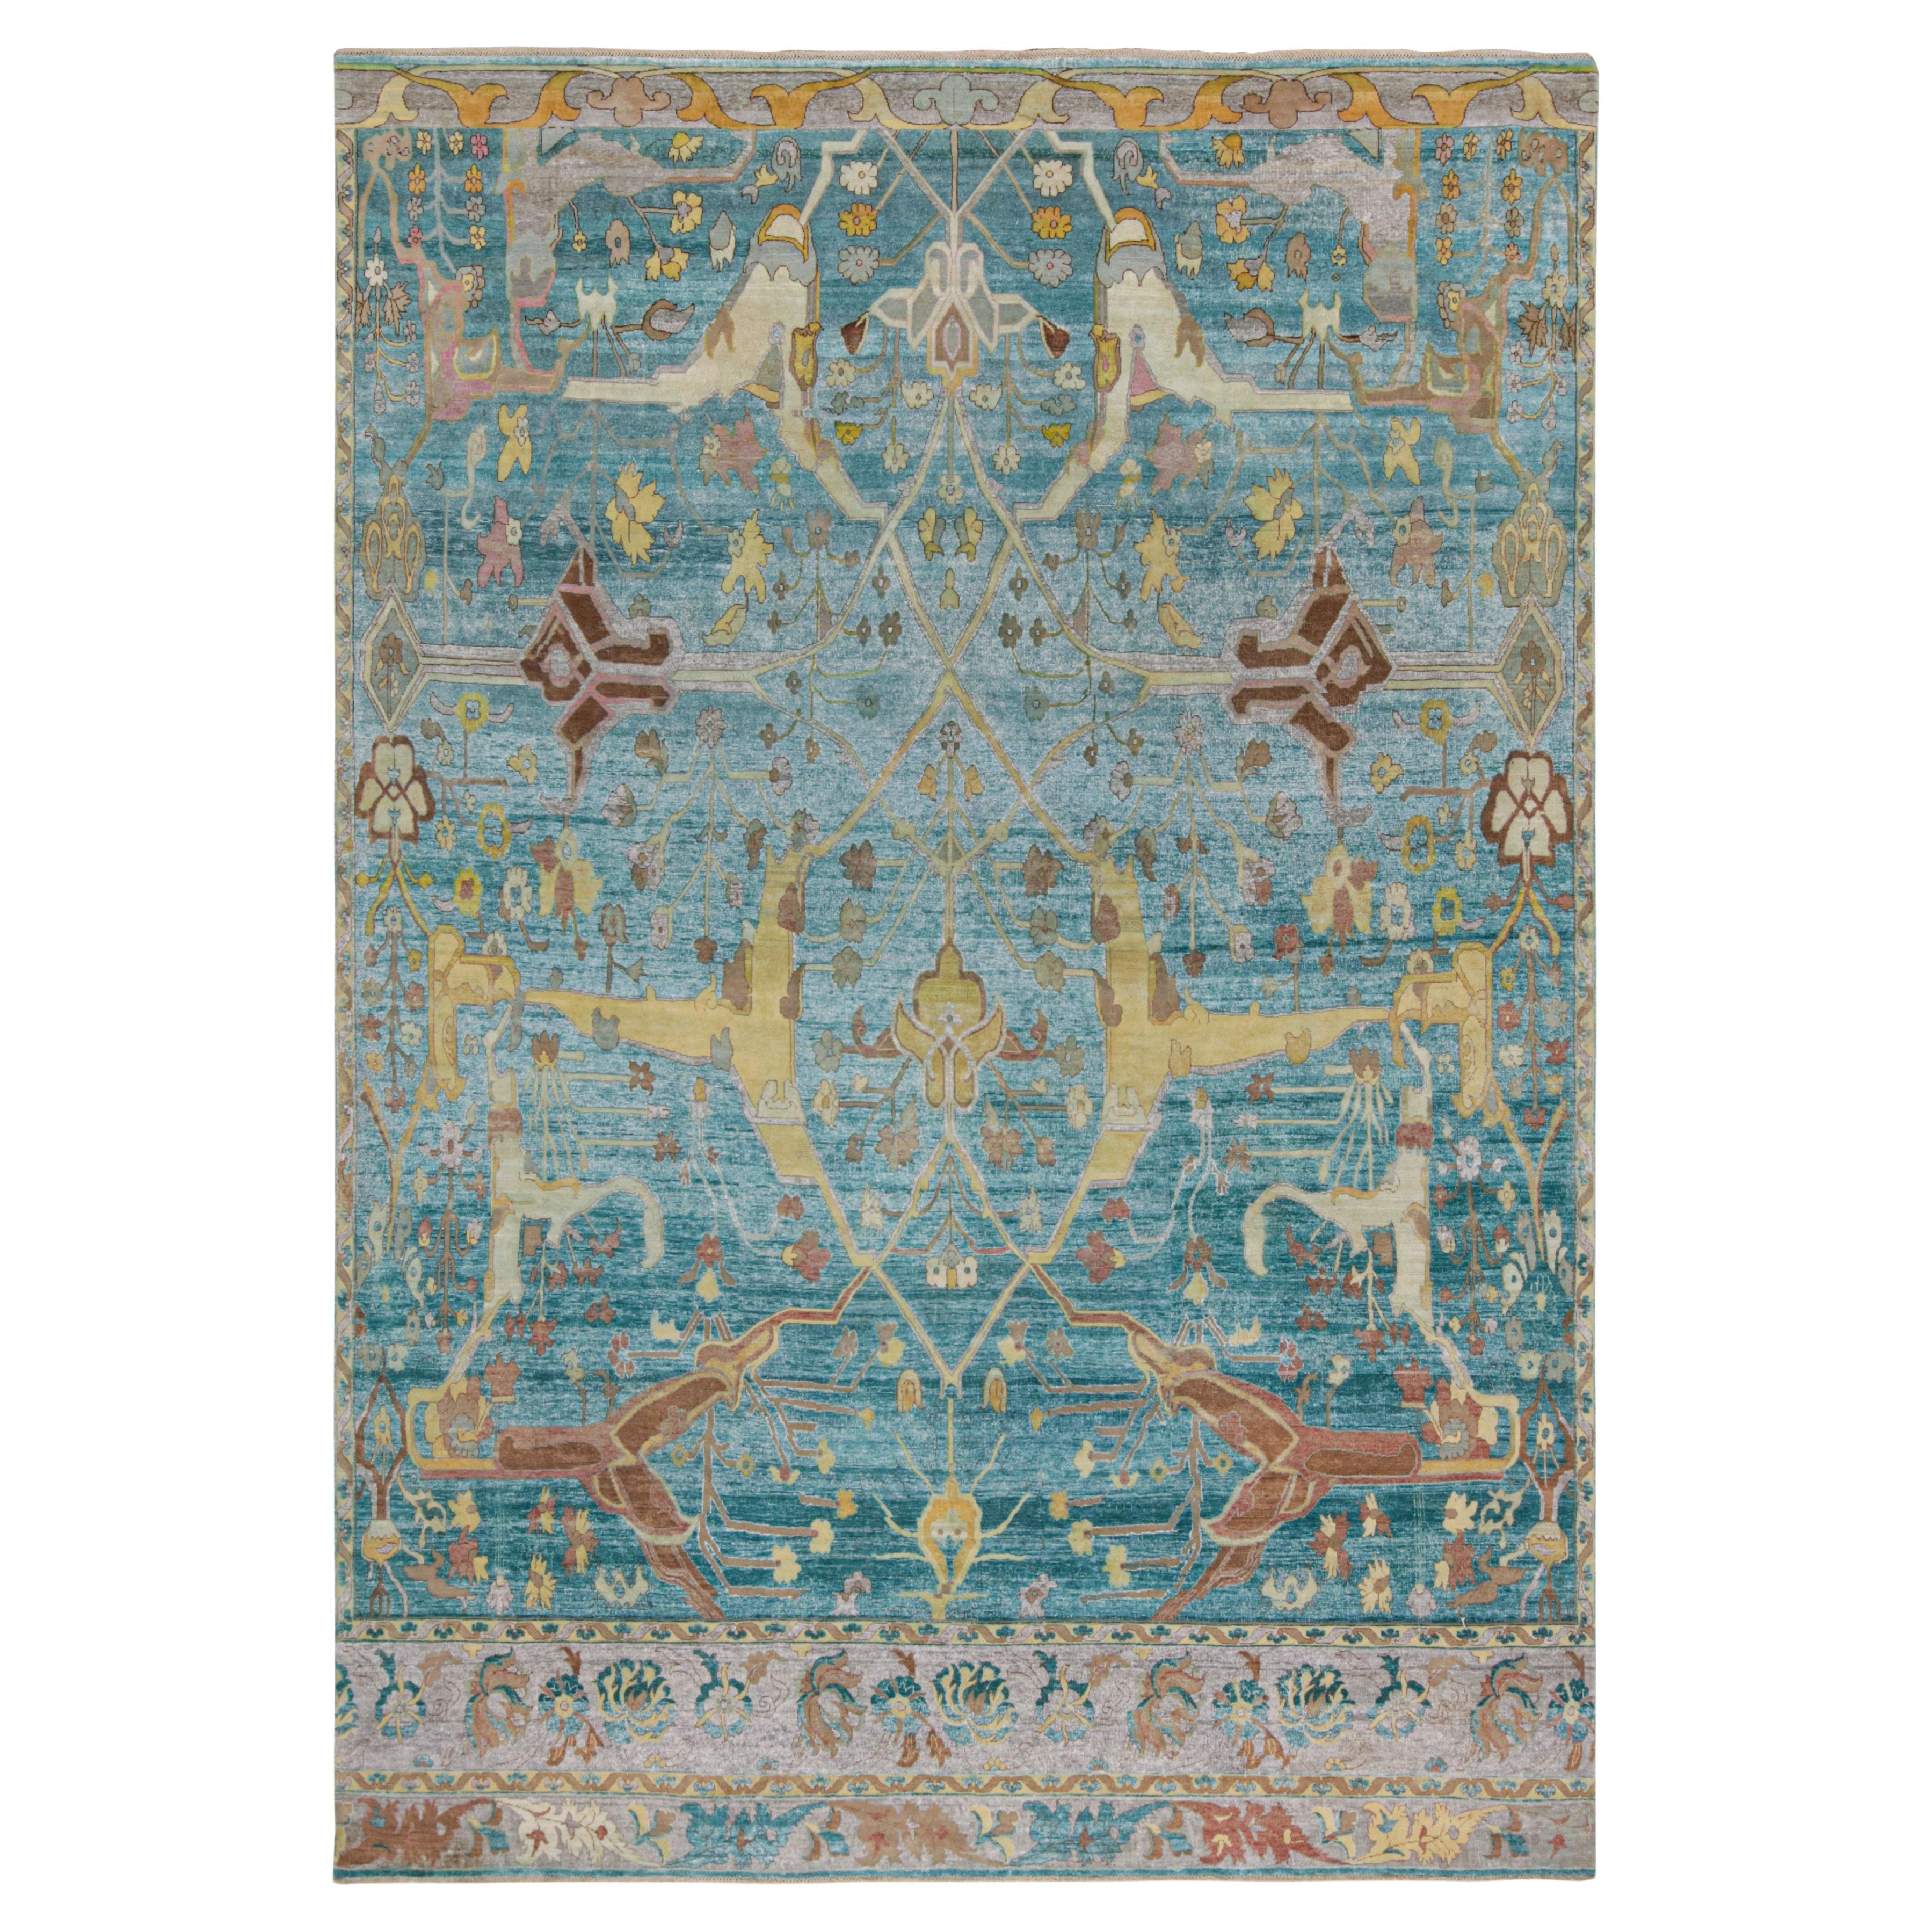 Rug & Kilim’s Contemporary Rug in Blue, with Brown and Gold Floral Patterns